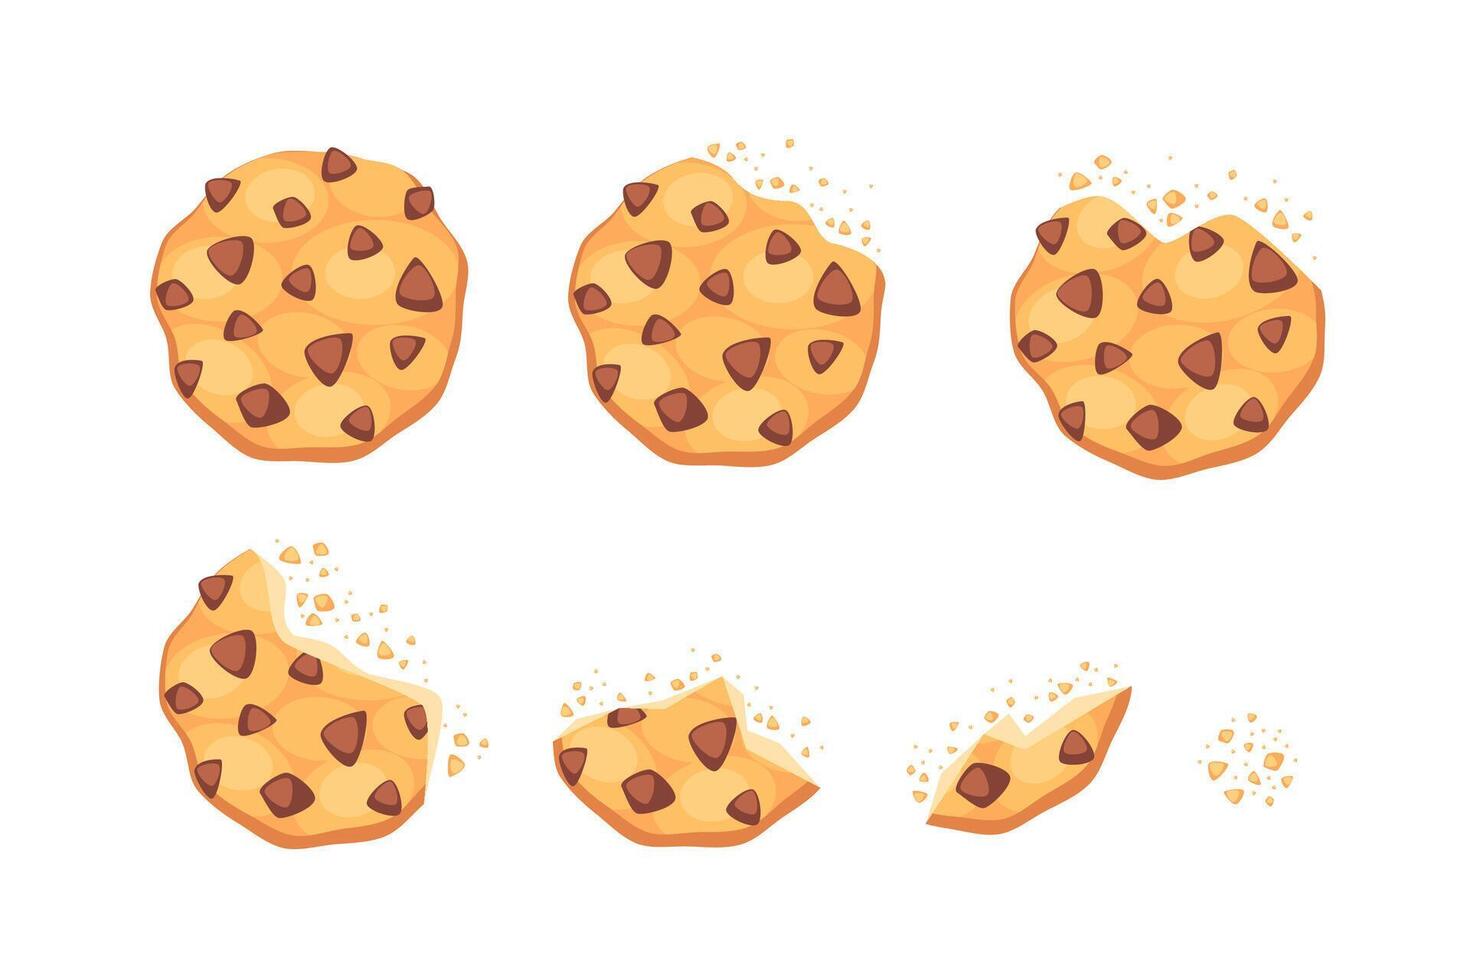 Traditional cookies with chocolate crisps. Homemade choco chip cookies. Vector illustration